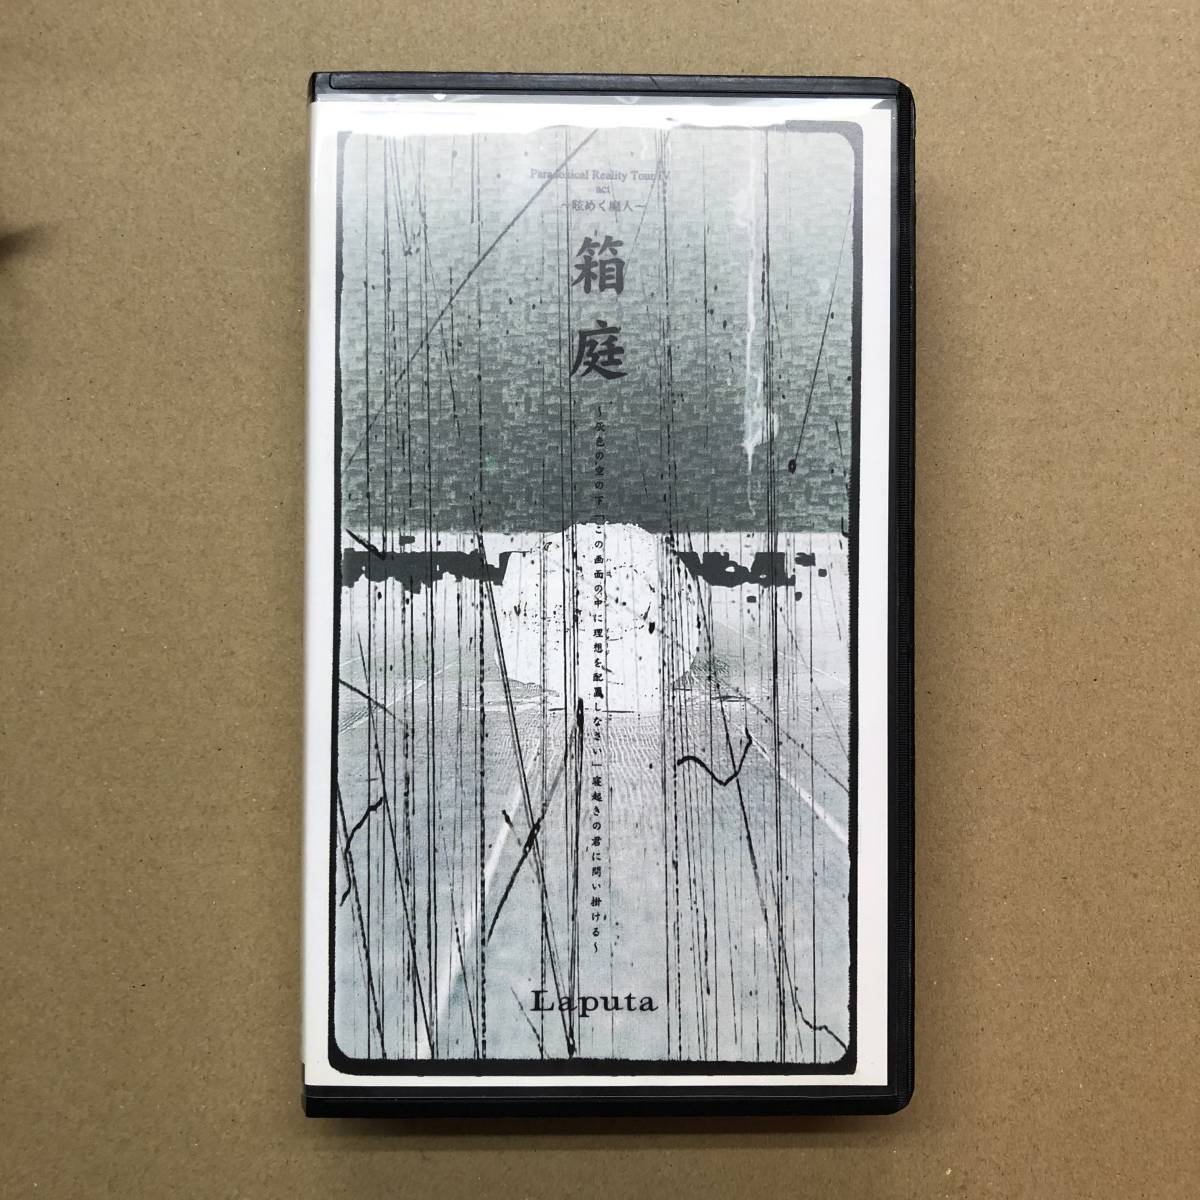 ■ Laputa - Mov(i)e On Darkness (TOVF-1266) / Clips Of Crunch Loop (TOVF-1281) / 箱庭 (TOVF-1288) VHS 3点セット ラピュータ_画像7